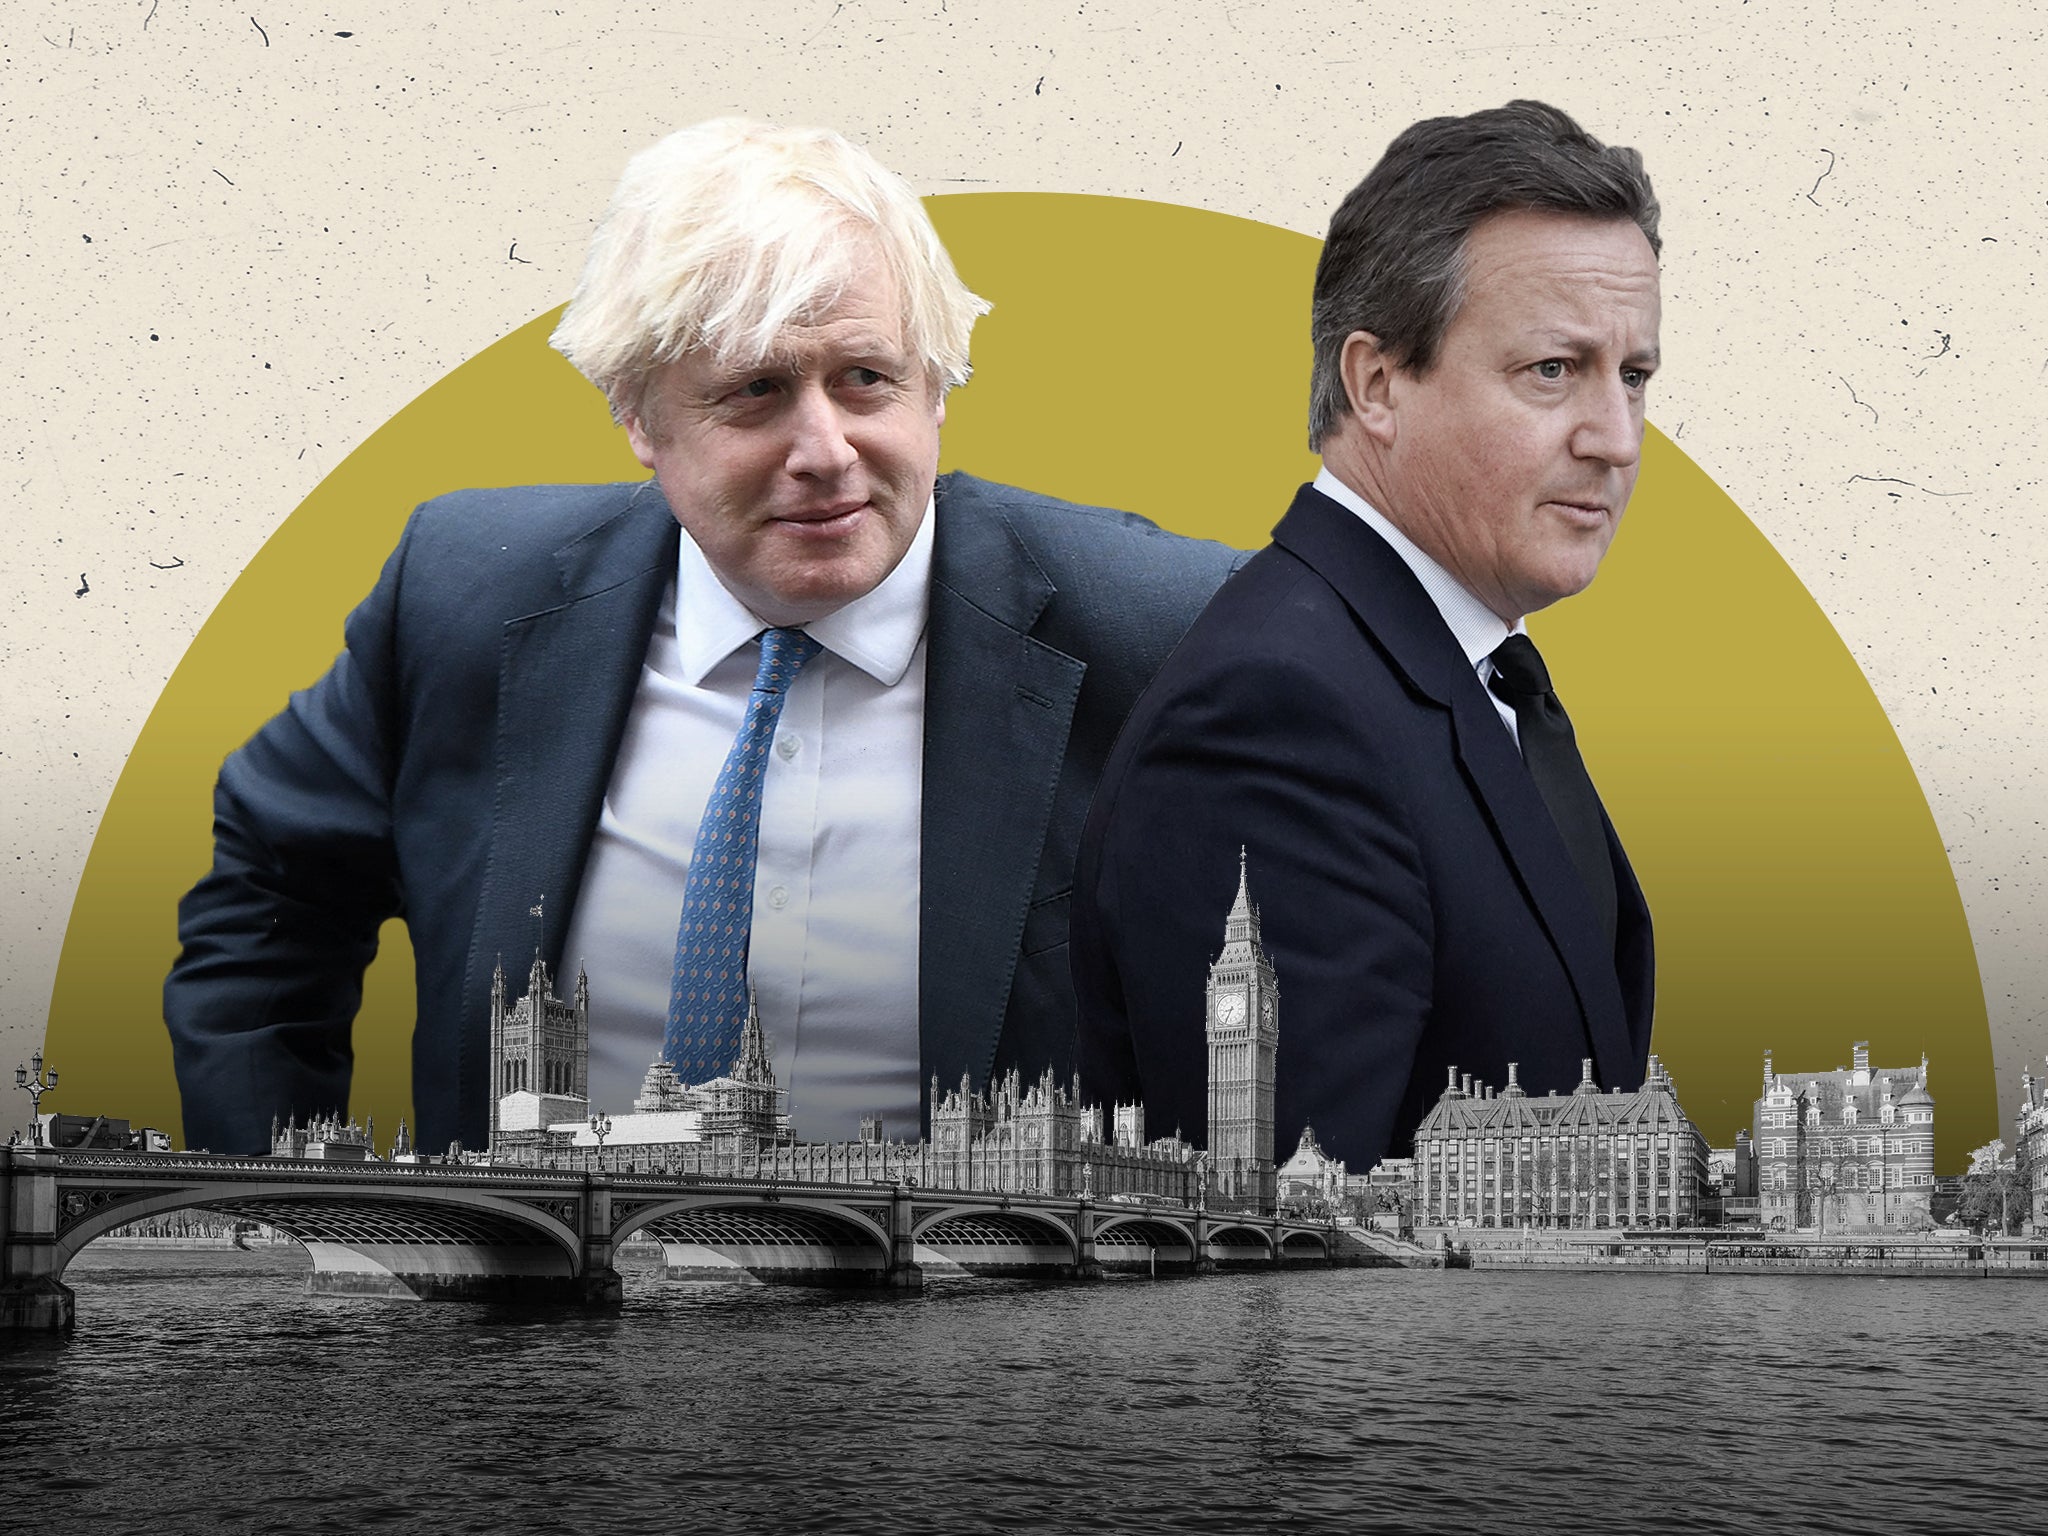 Johnson is better at winning power; Cameron is better at exercising it